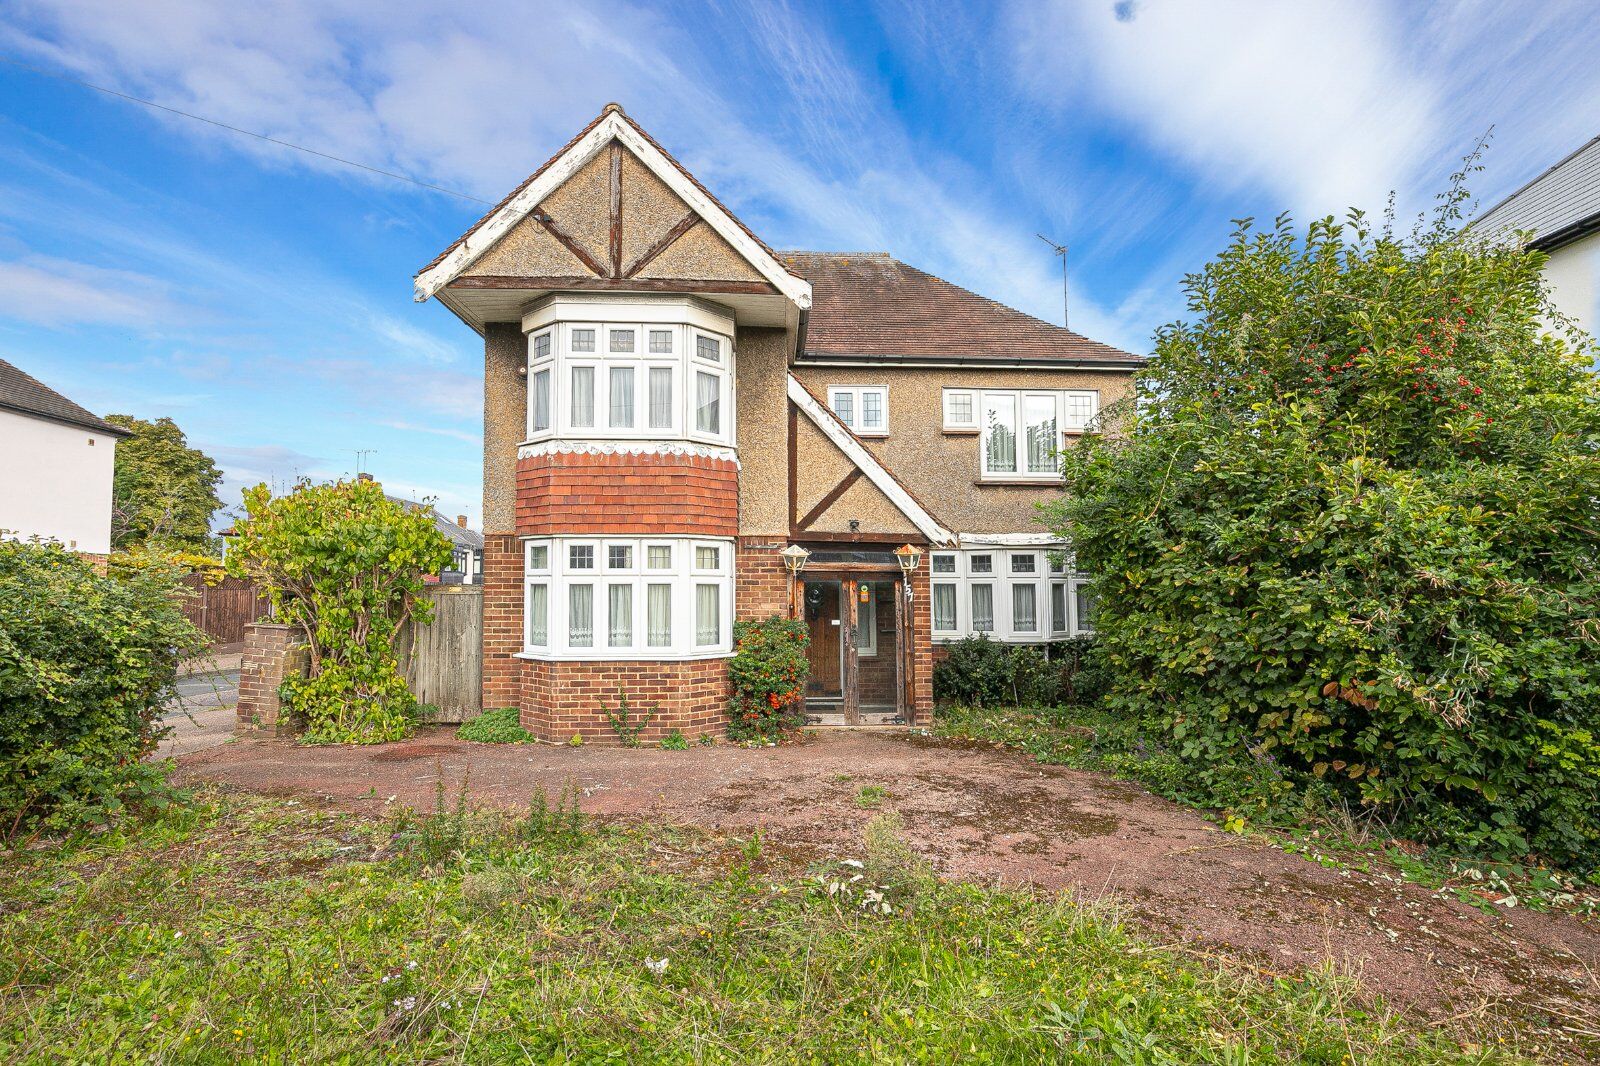 3 bedroom detached house for sale Lambourne Road, Chigwell, IG7, main image